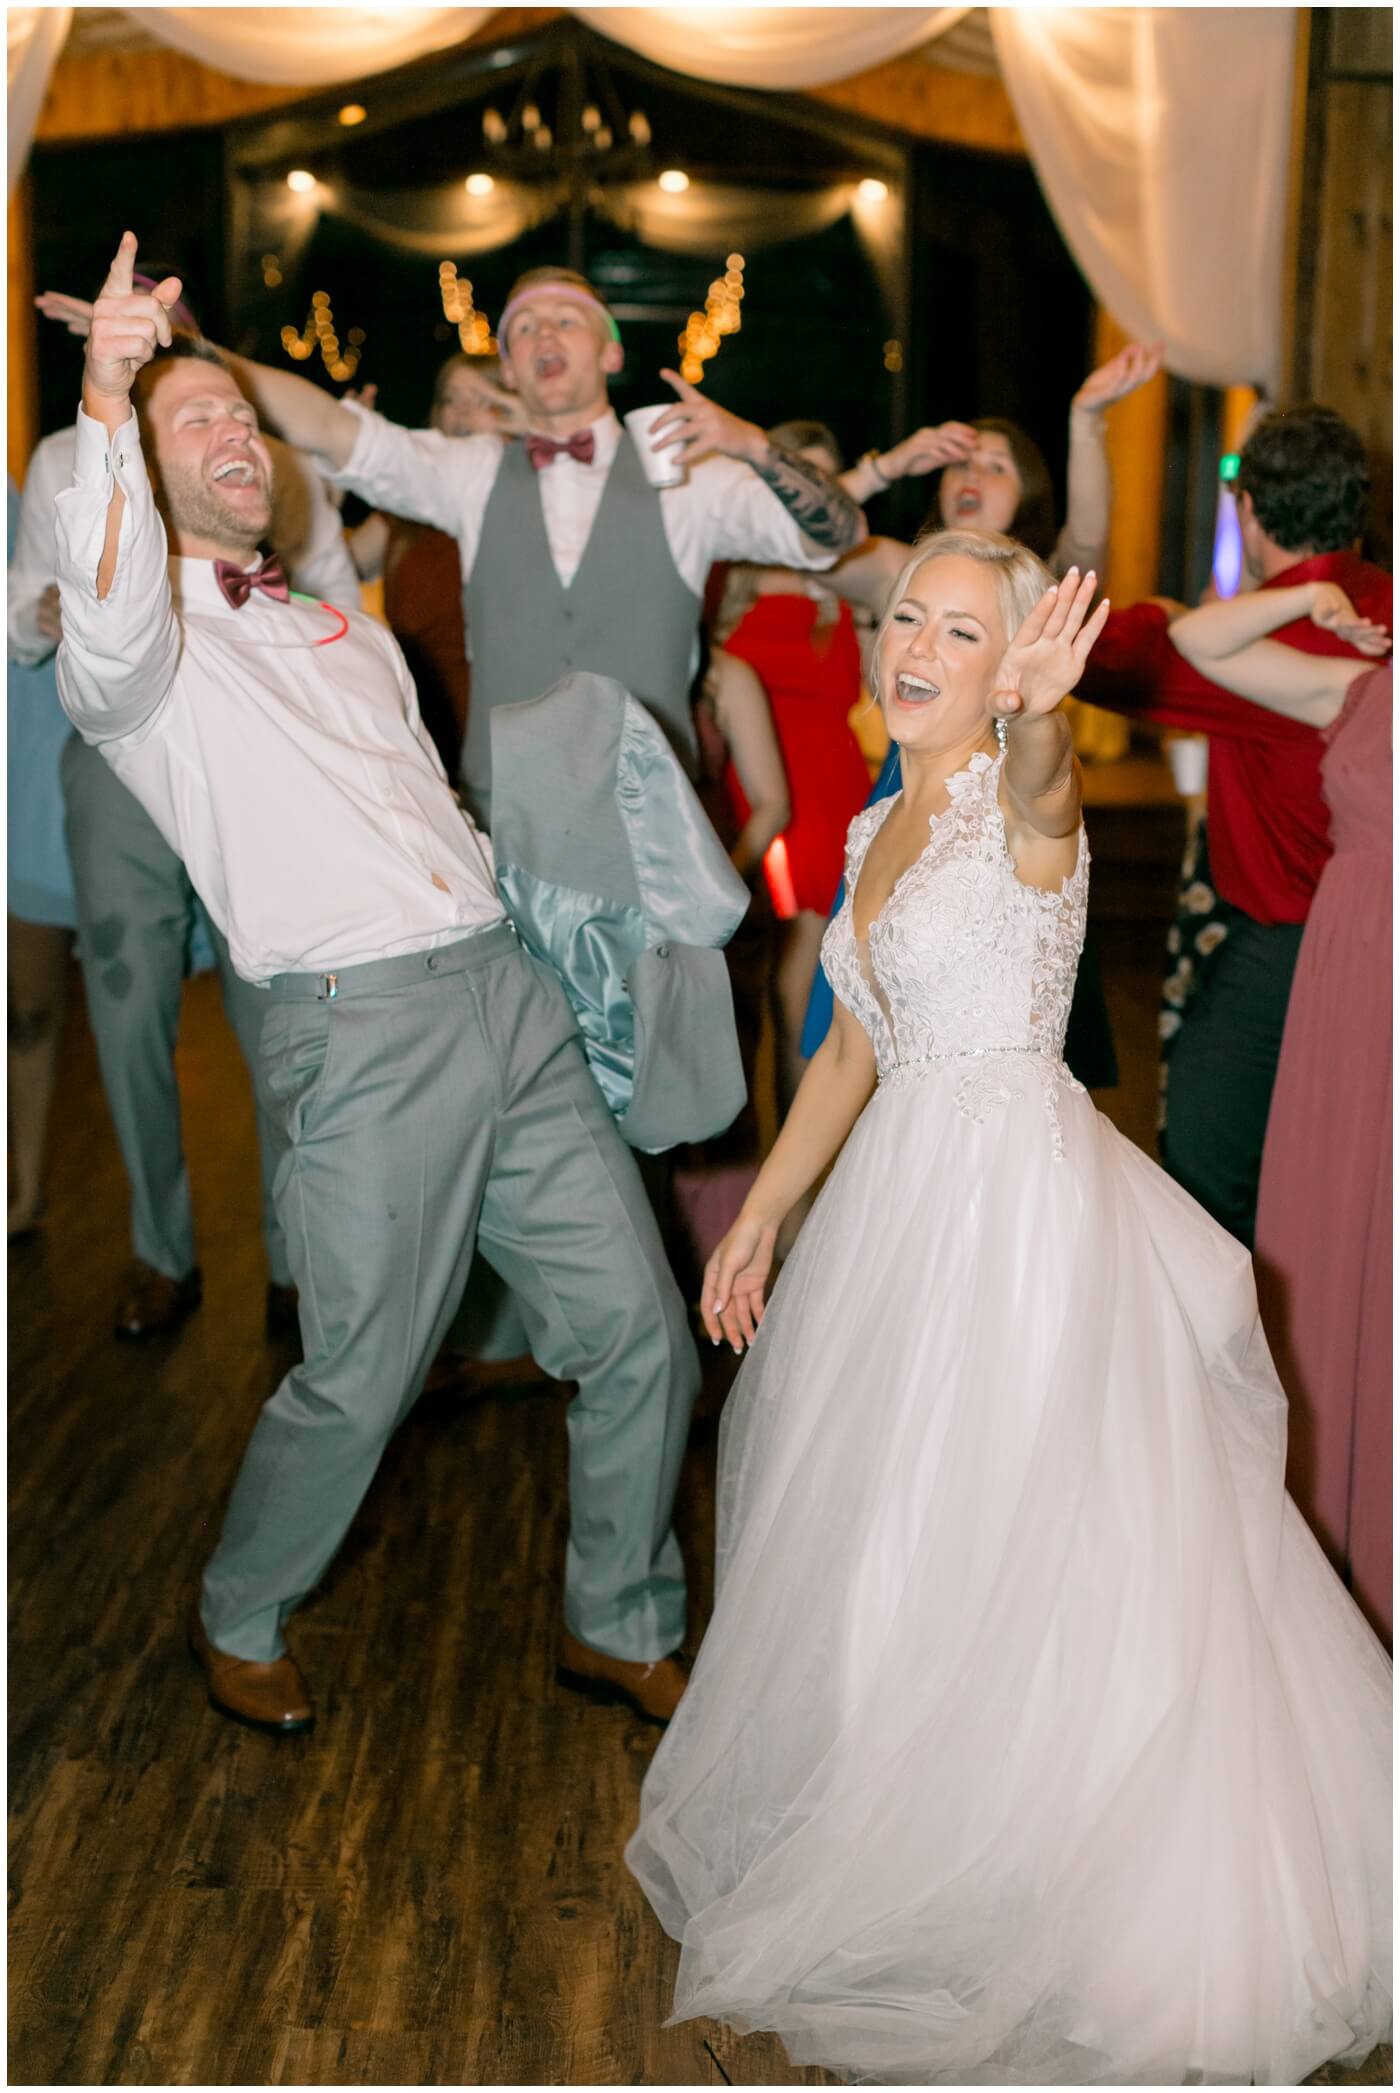 the bride and groom dance at this houston wedding